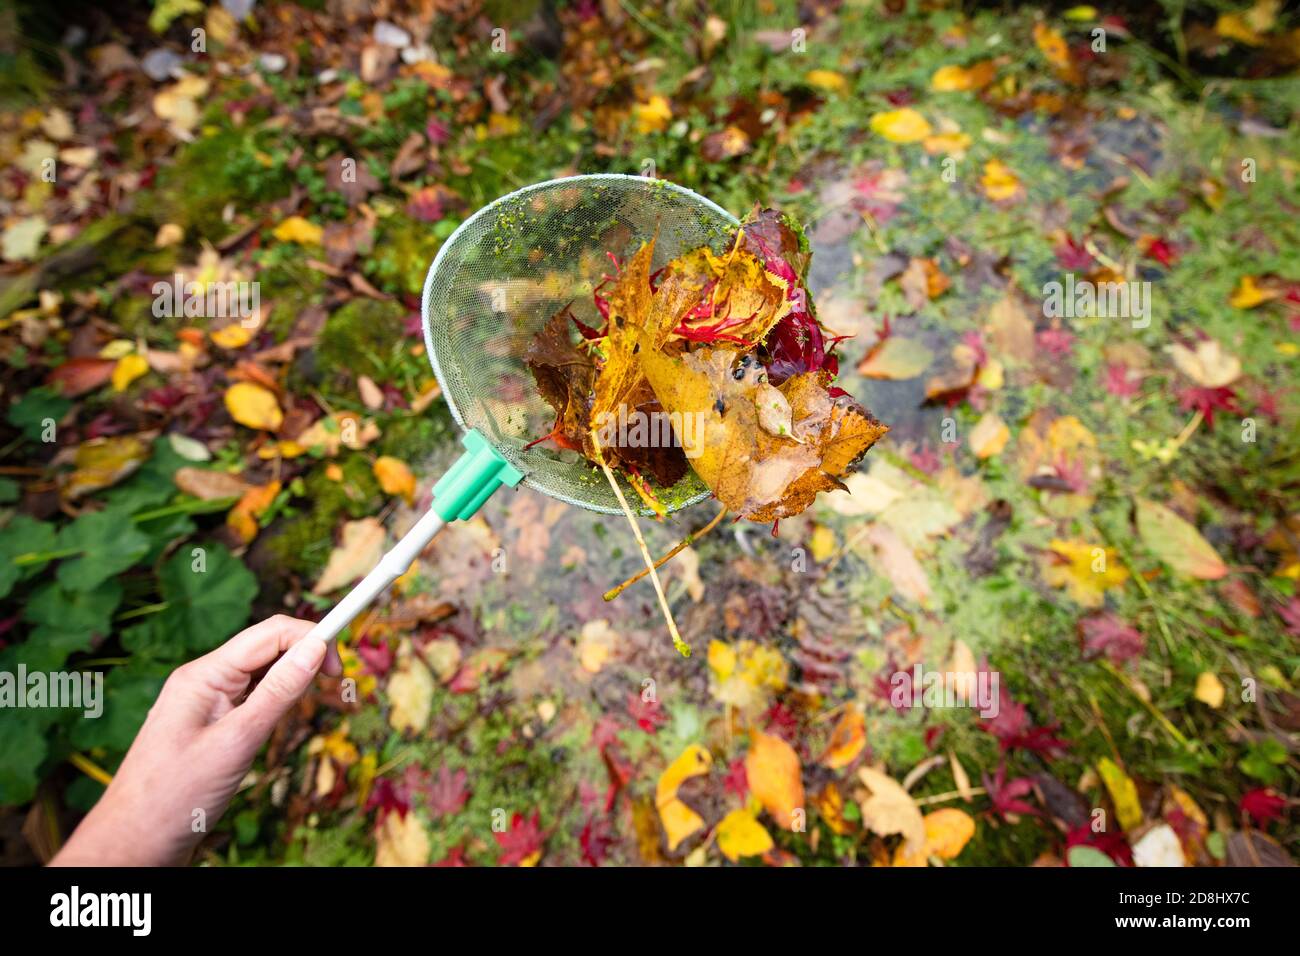 clearing leaves and duckweed from a small garden wildlife pond in autumn using a fishing net - UK Stock Photo